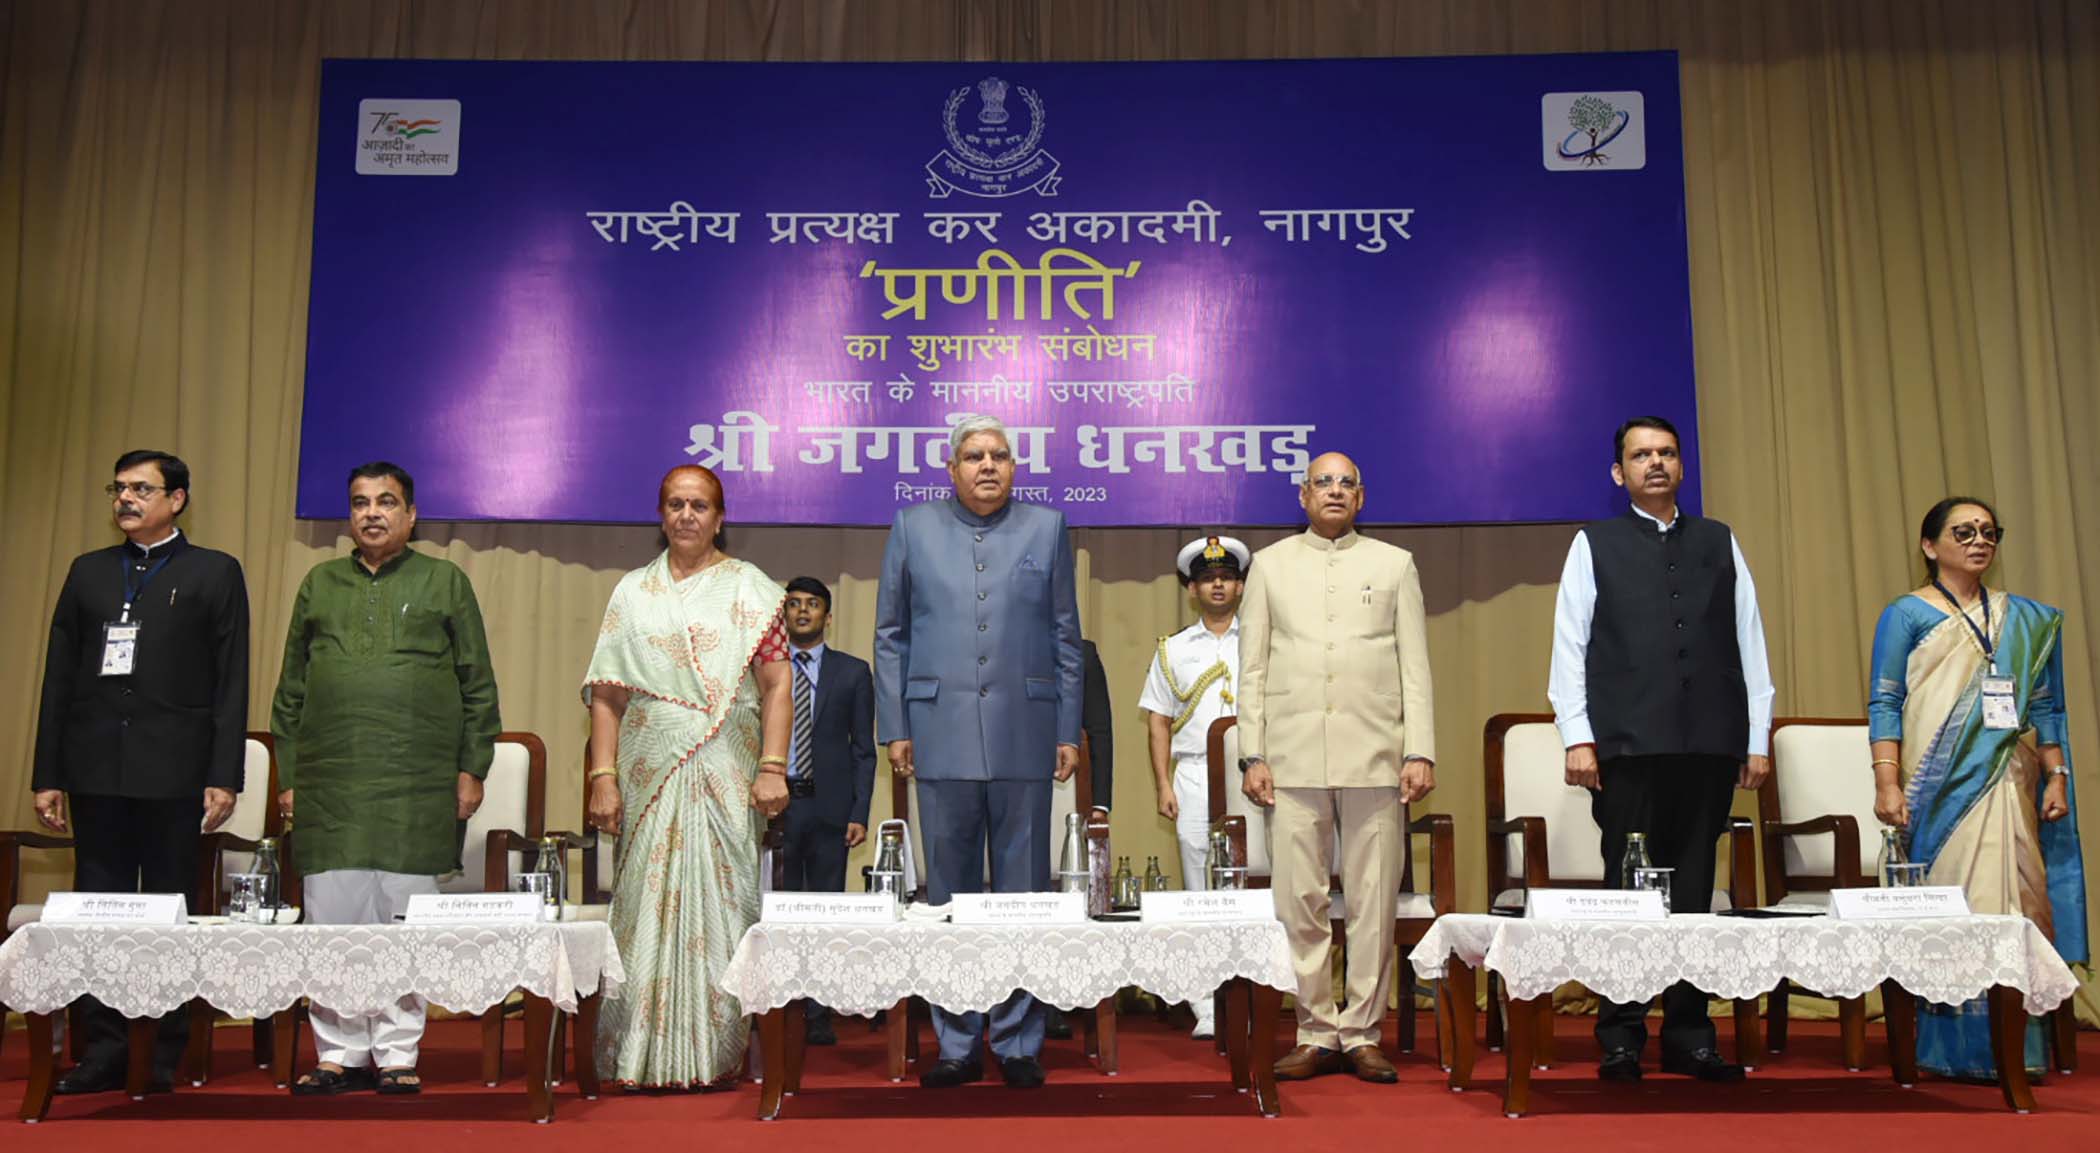 The Vice President, Shri Jagdeep Dhankhar graces the inaugural ceremony of 'PRANEETI' at  National Academy Of Direct Taxes Nagpur in Maharashtra on August 4, 2023.